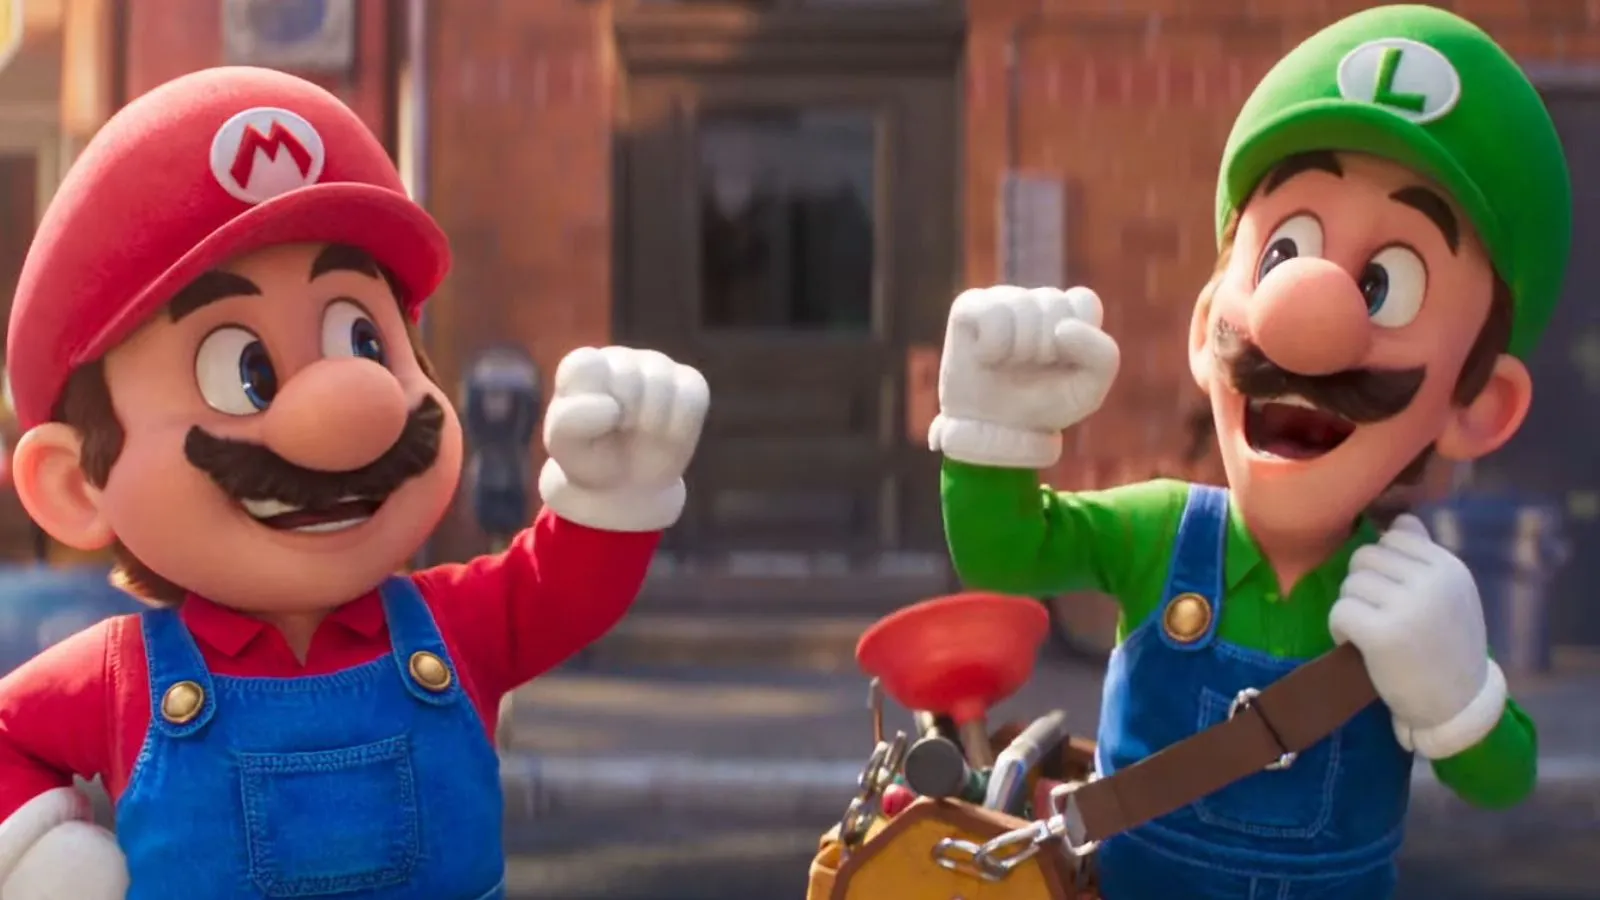 Someone recreated ‘The Super Mario Bros. Movie’ trailer in the style of the Nintendo 64 and it’s amazing